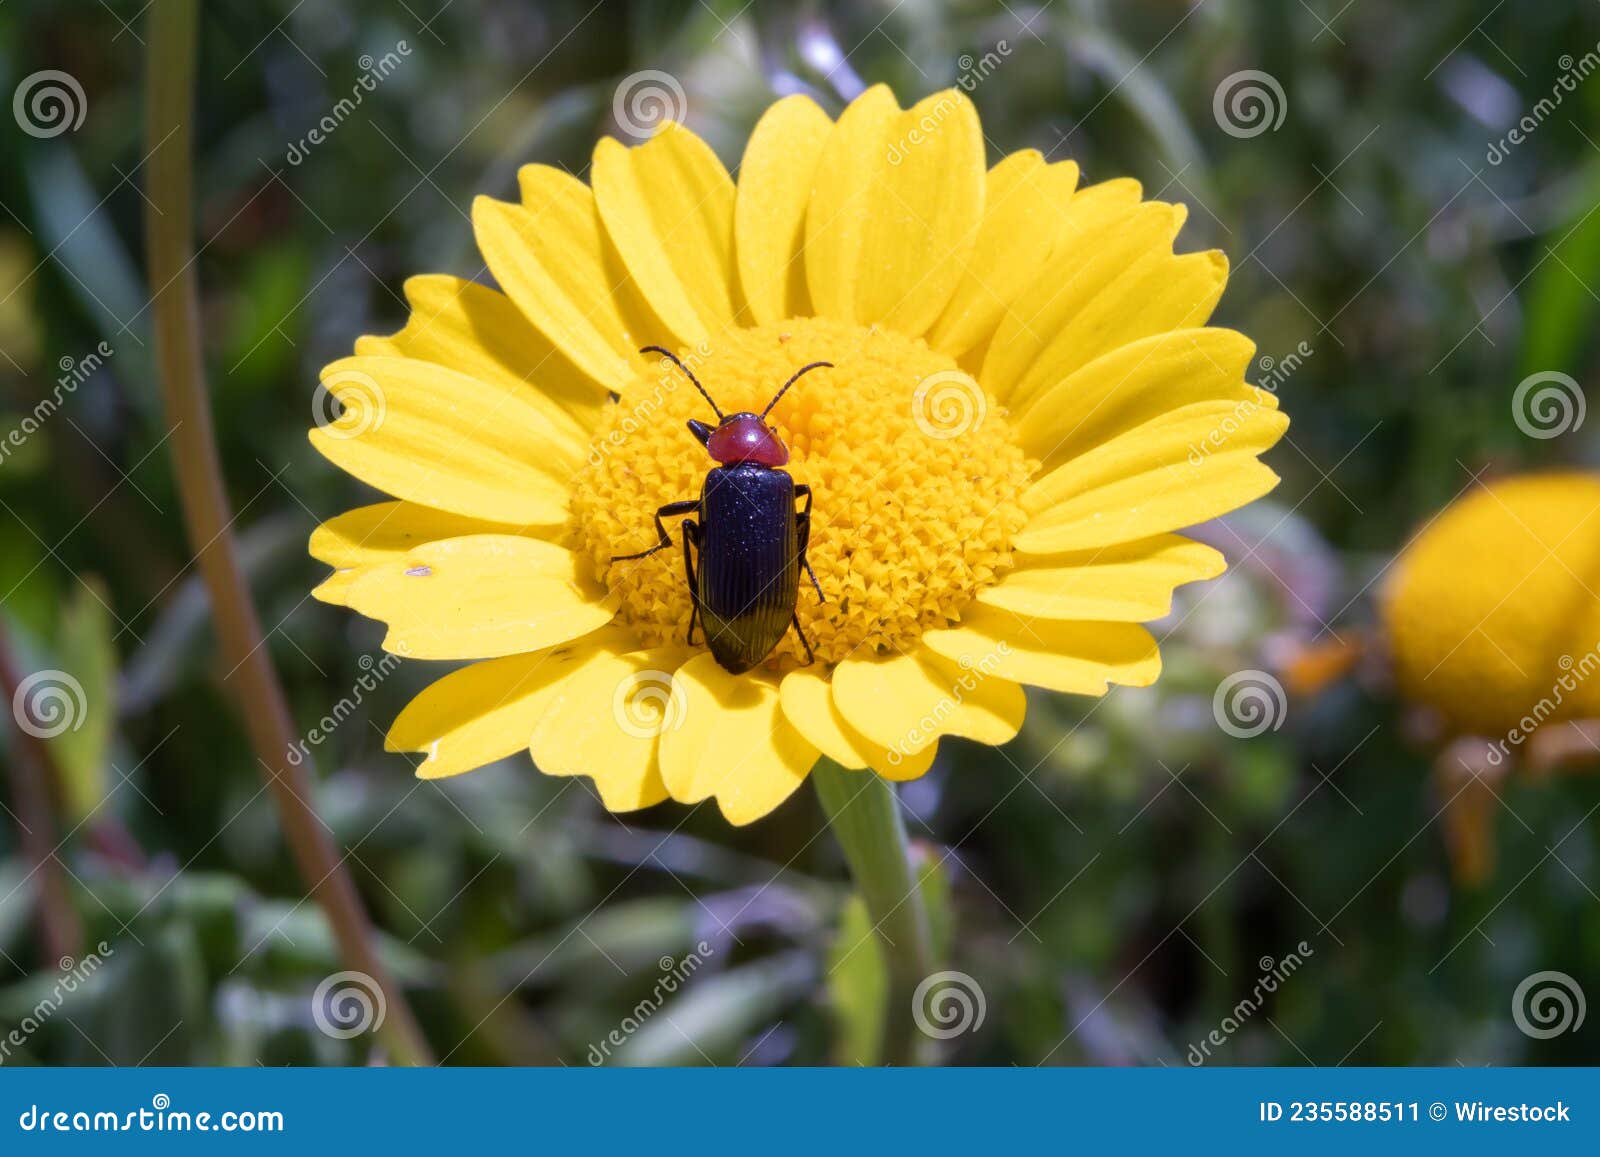 a coleoptera tenebrionidae perched on a anthemis tinctoria